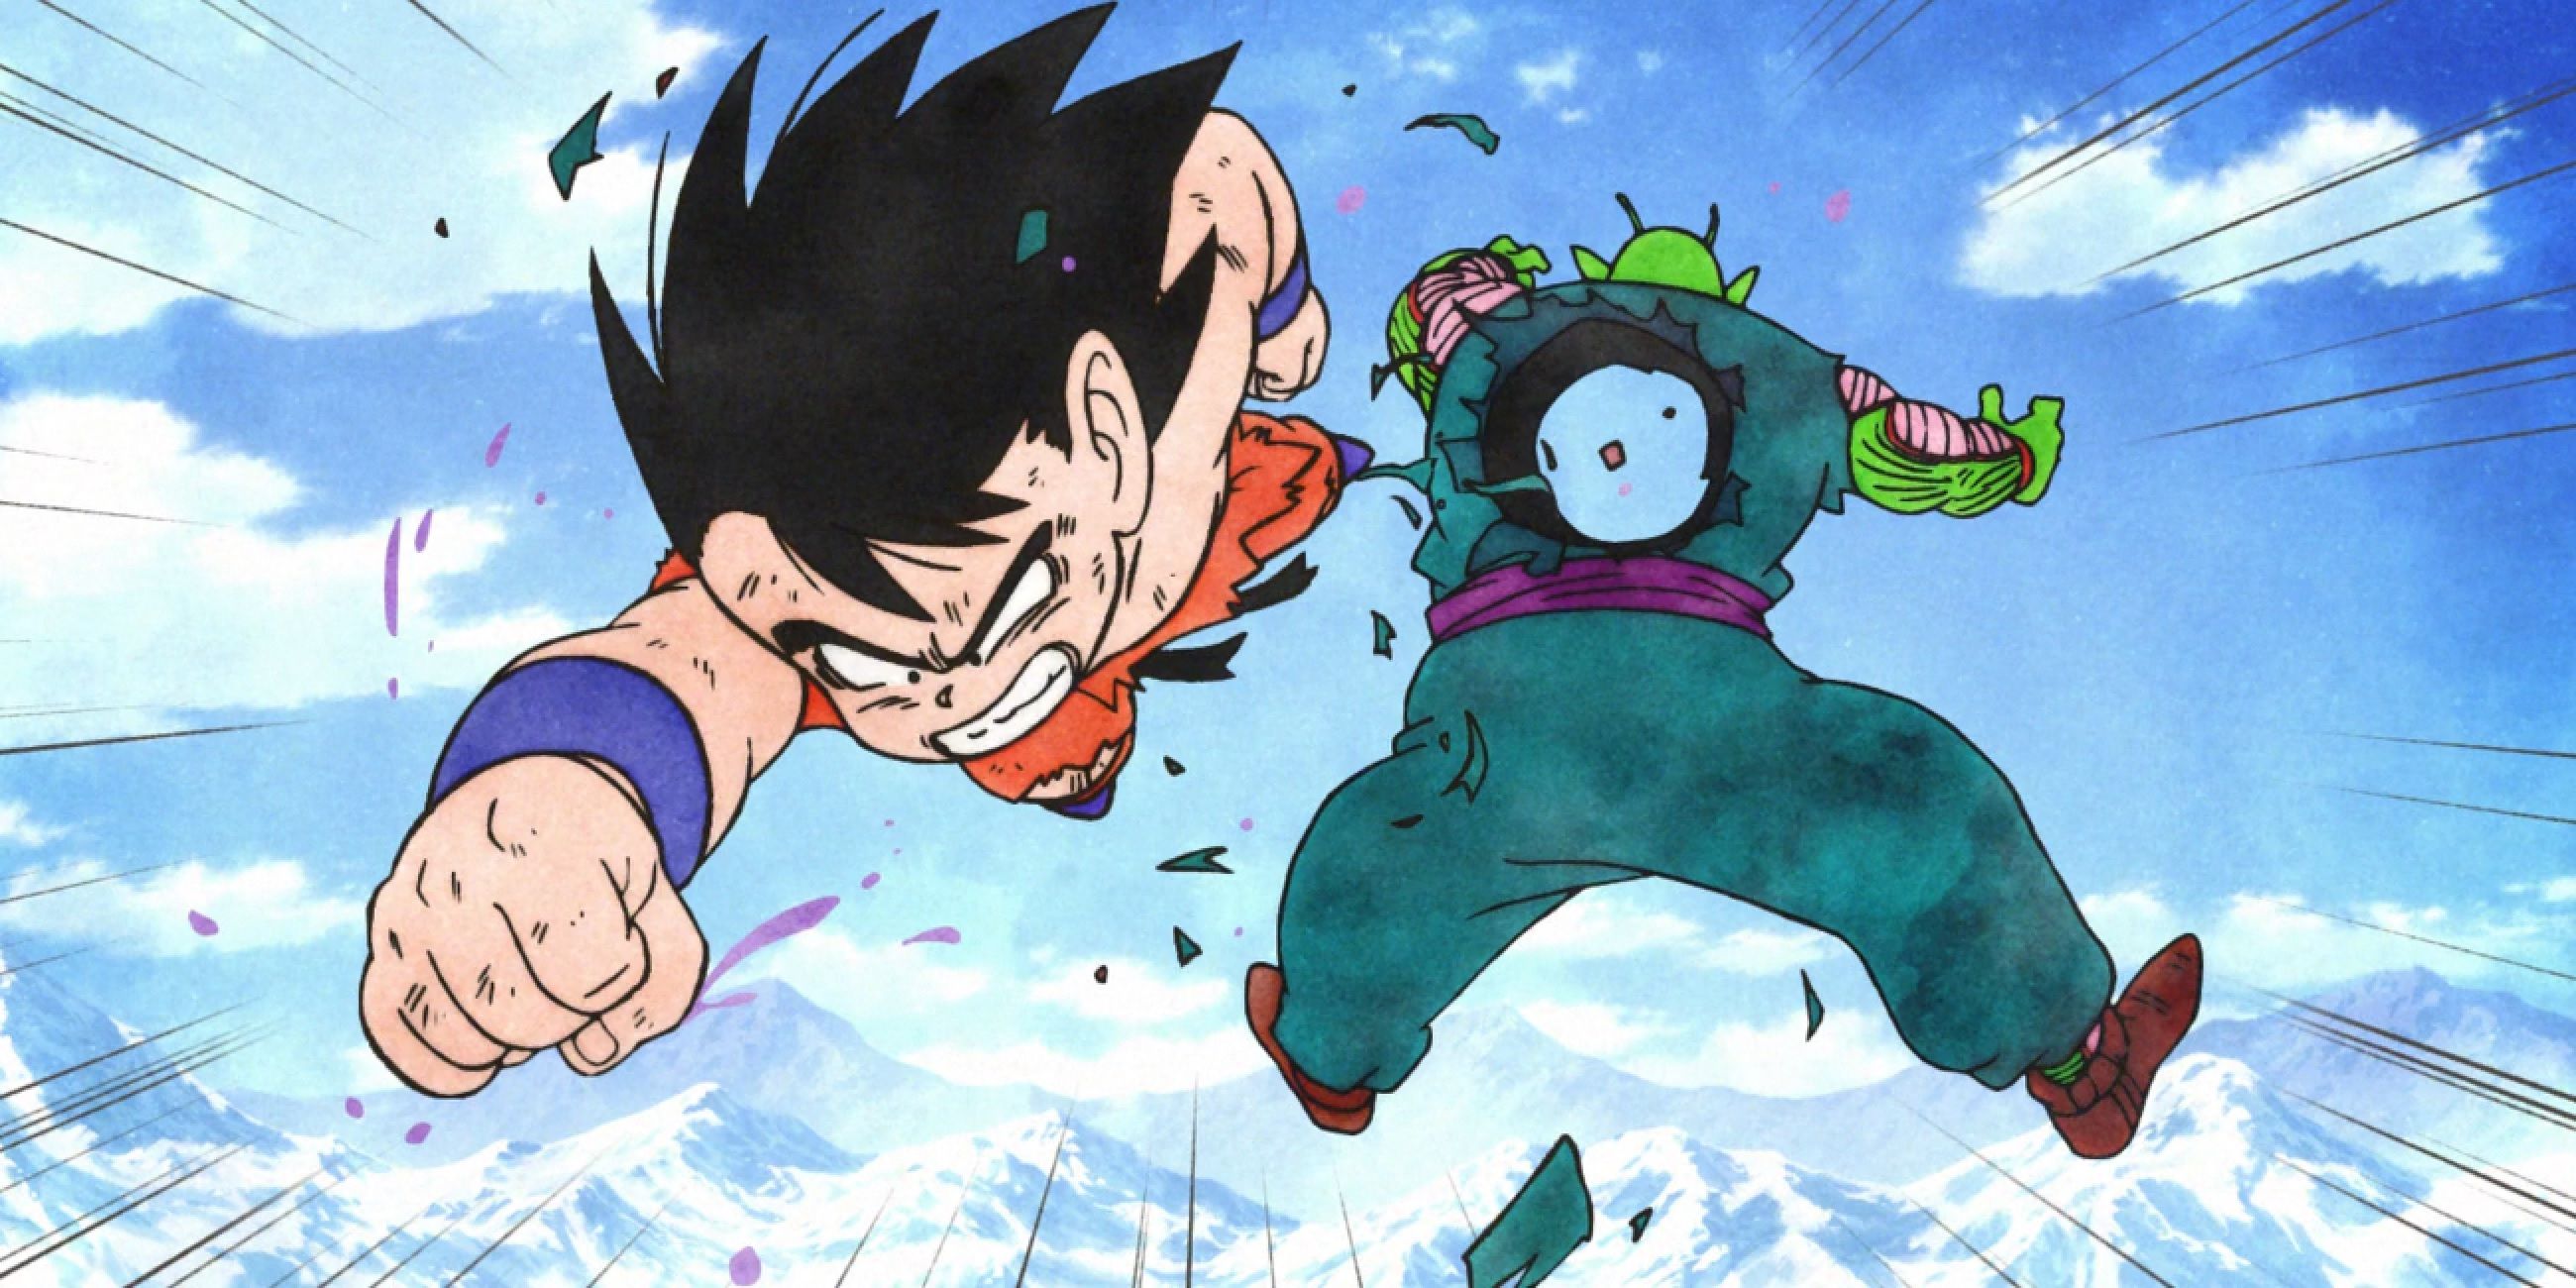 Goku punches a hole through King Piccolo in a flashback from Dragon Ball Super Broly